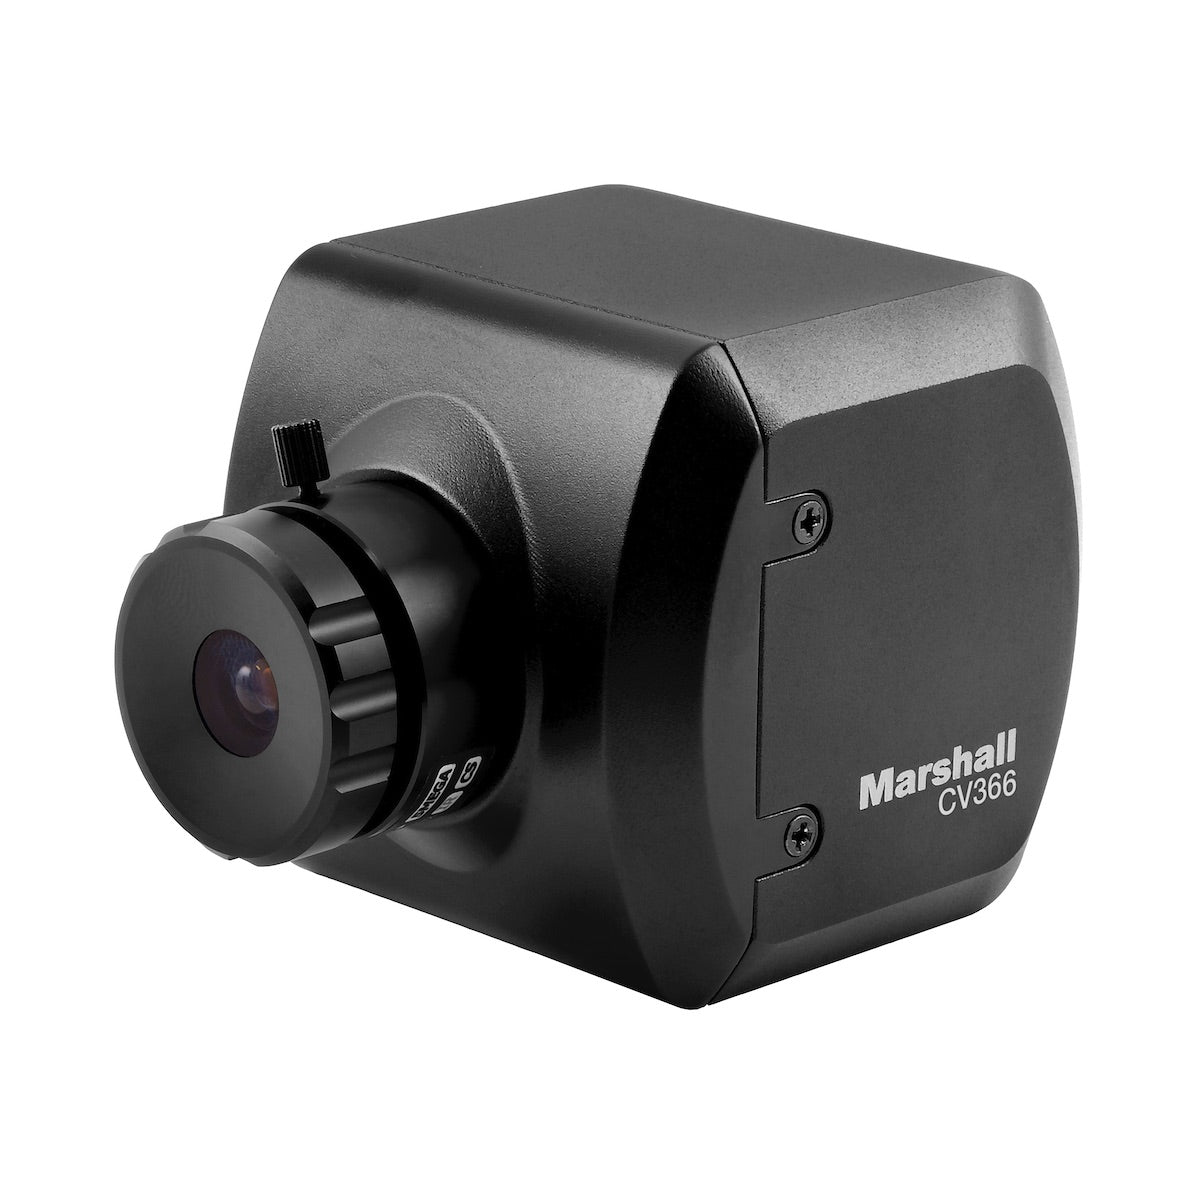 Marshall CV366 - Compact HD Camera with Genlock, Lens Sold Separately, left angle